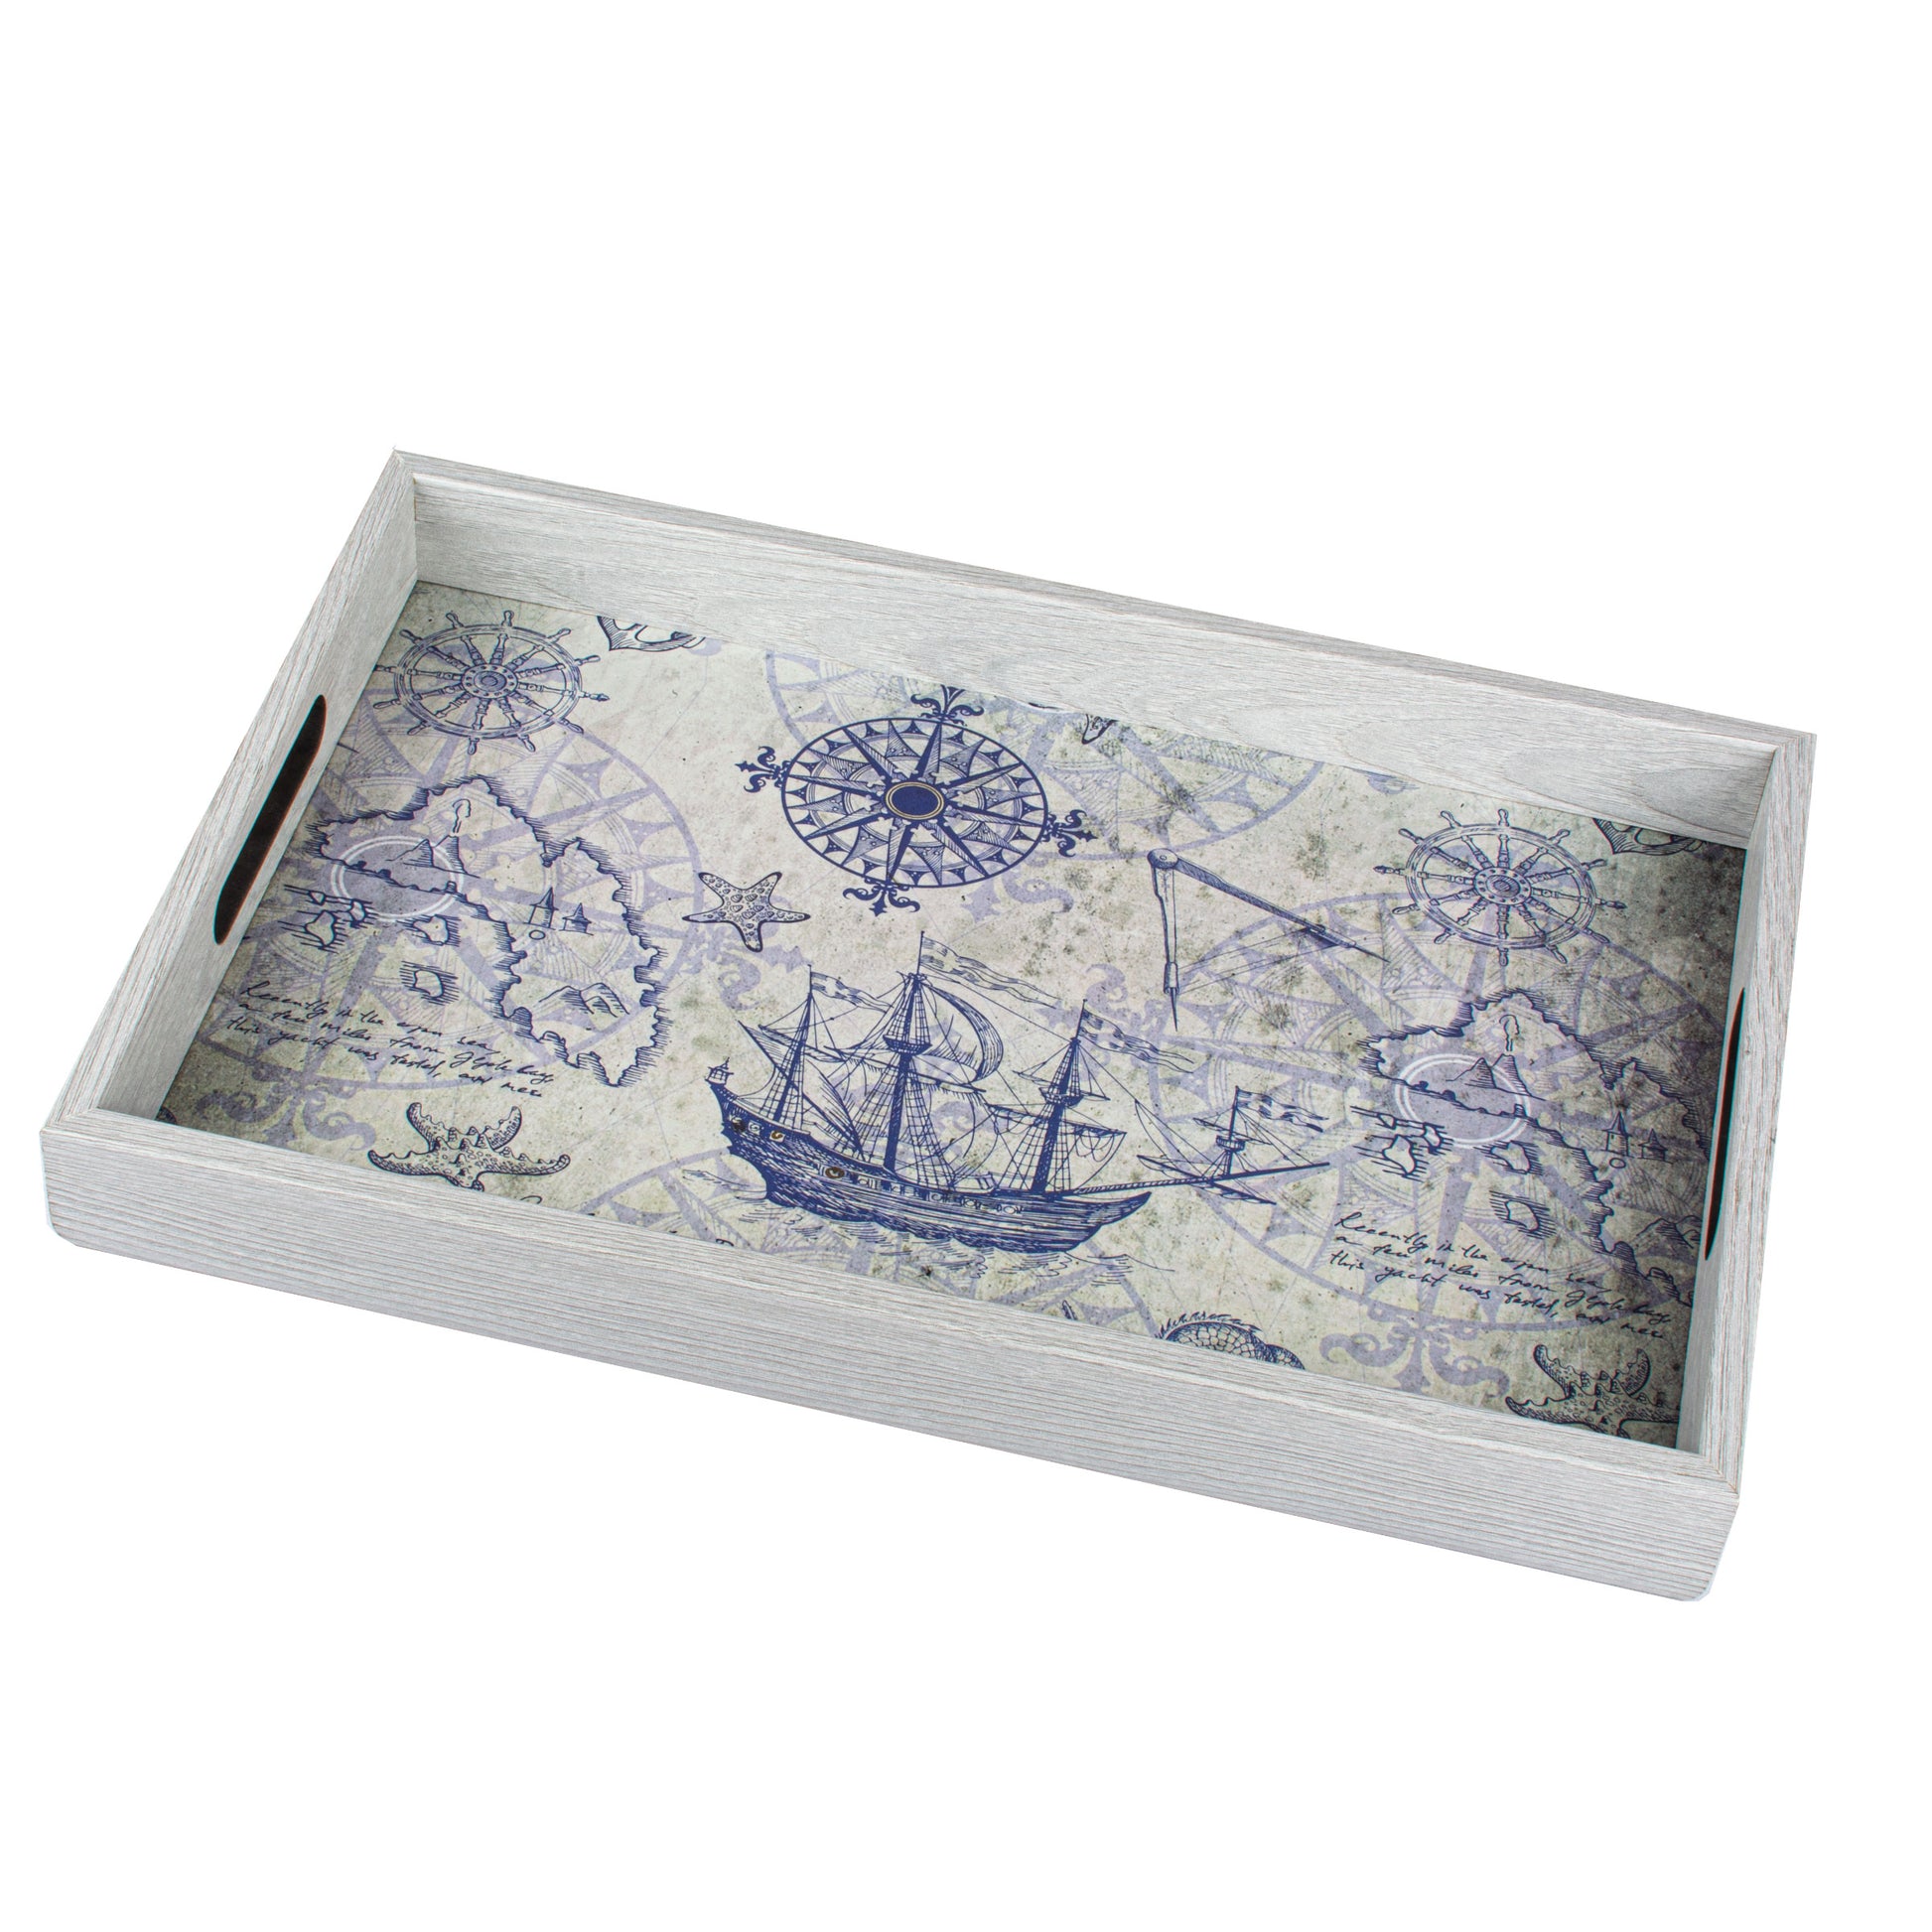 Luxury Nautical Style Wooden Tray - Handcrafted Decorative Design - Premium Decorative Objects from MANOPOULOS Chess & Backgammon - Just €25! Shop now at MANOPOULOS Chess & Backgammon